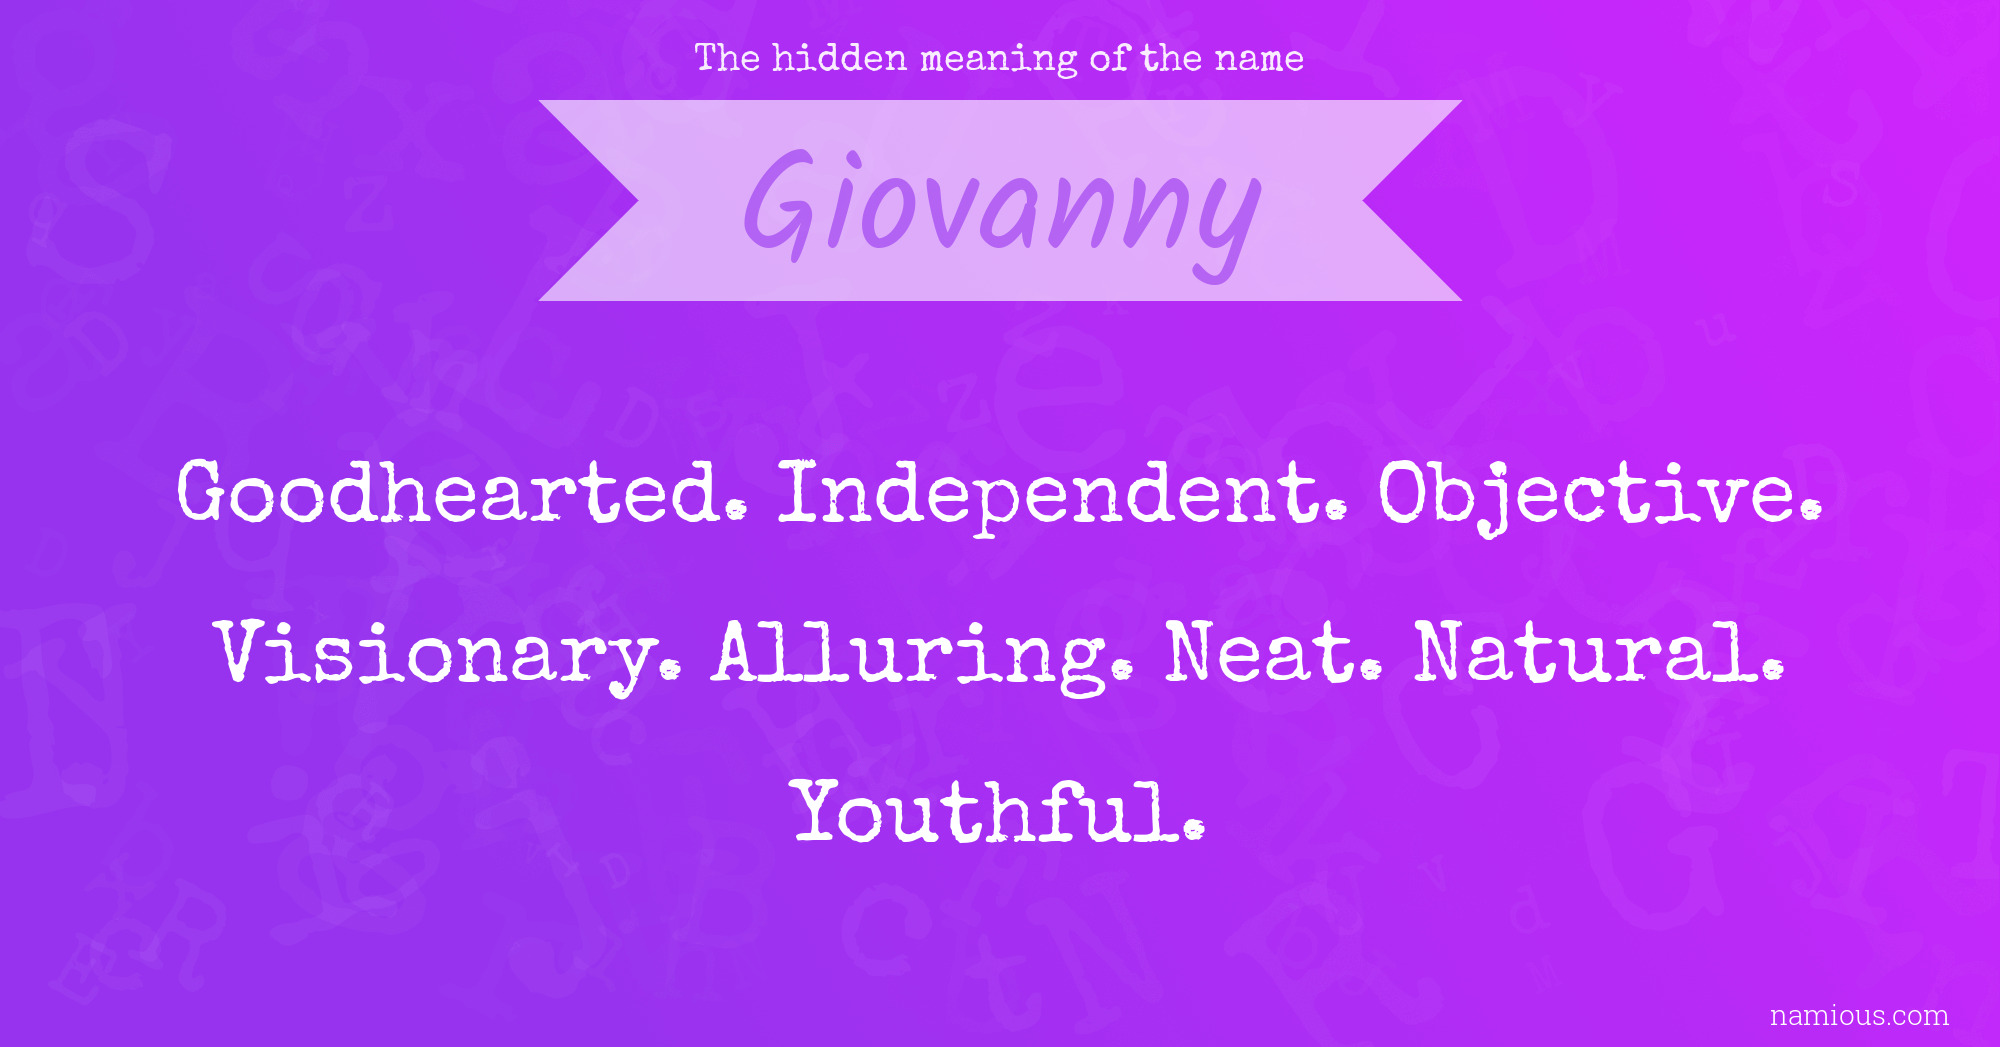 The hidden meaning of the name Giovanny